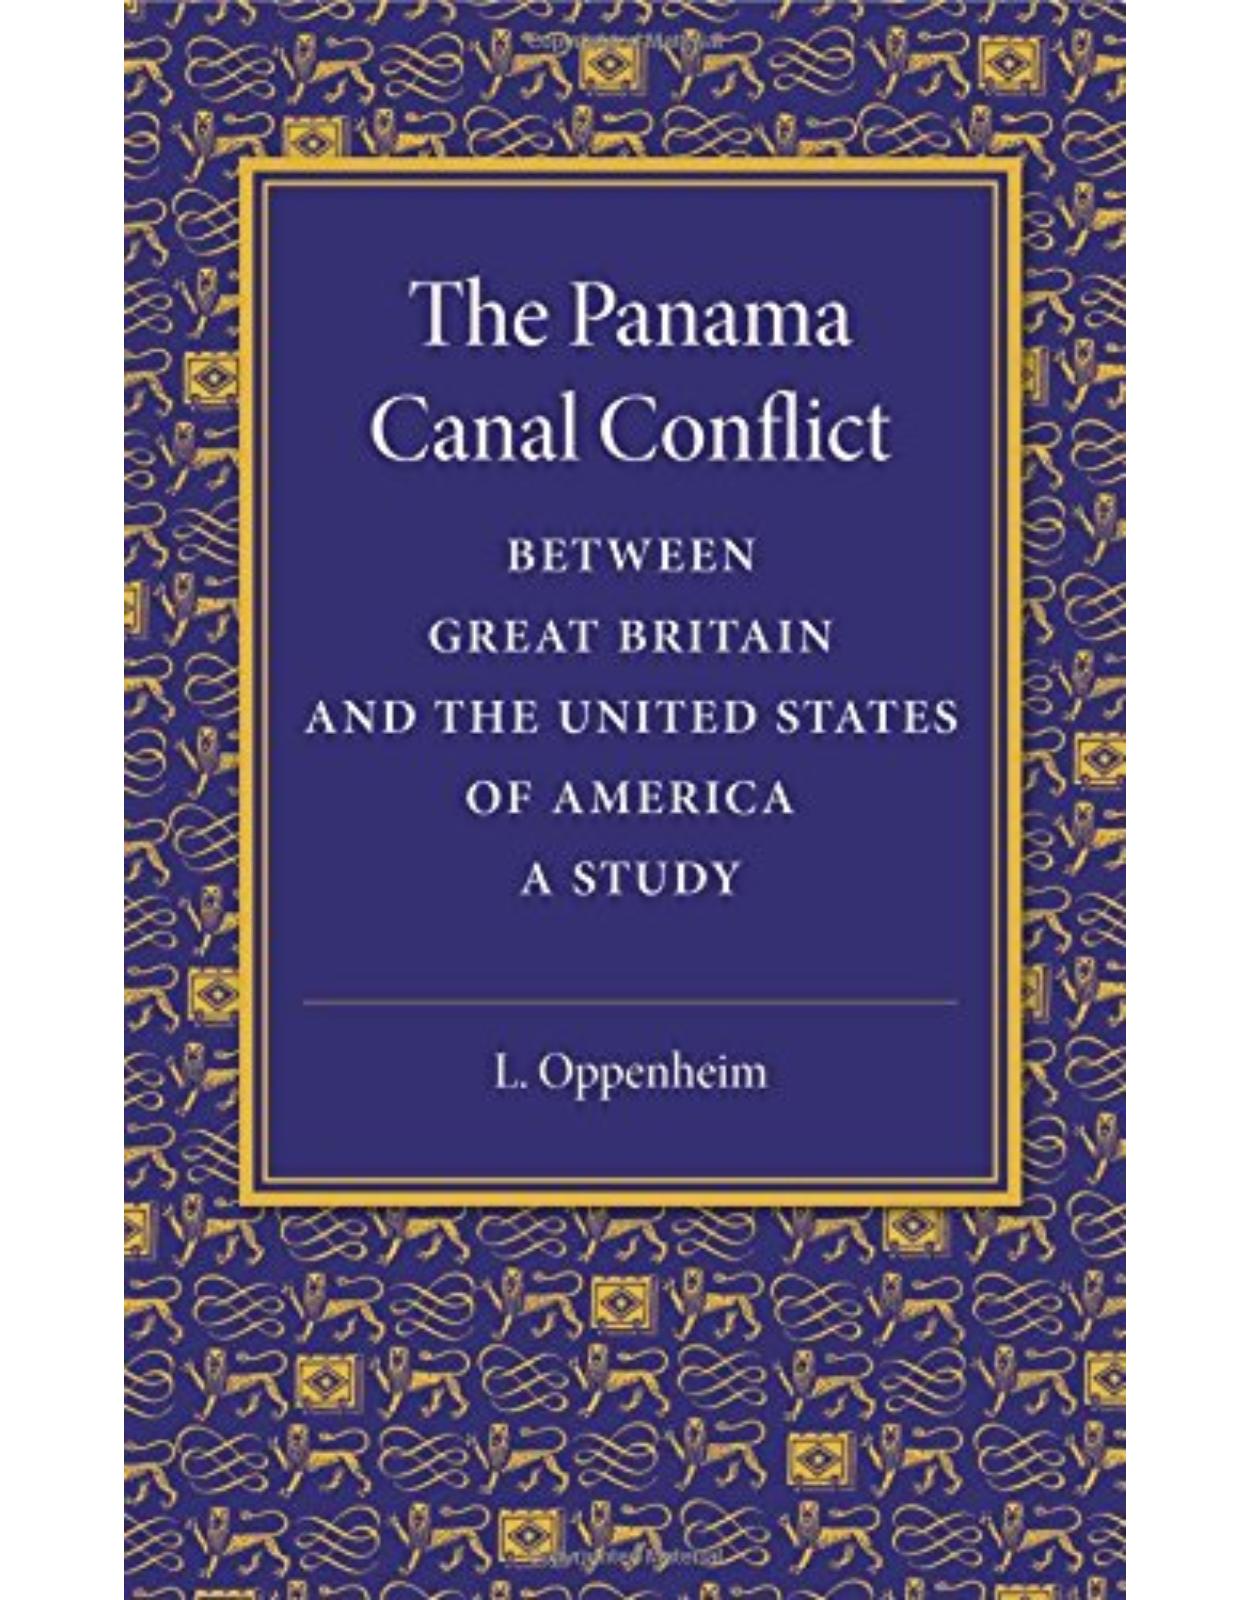 The Panama Canal Conflict between Great Britain and the United States of America: A Study